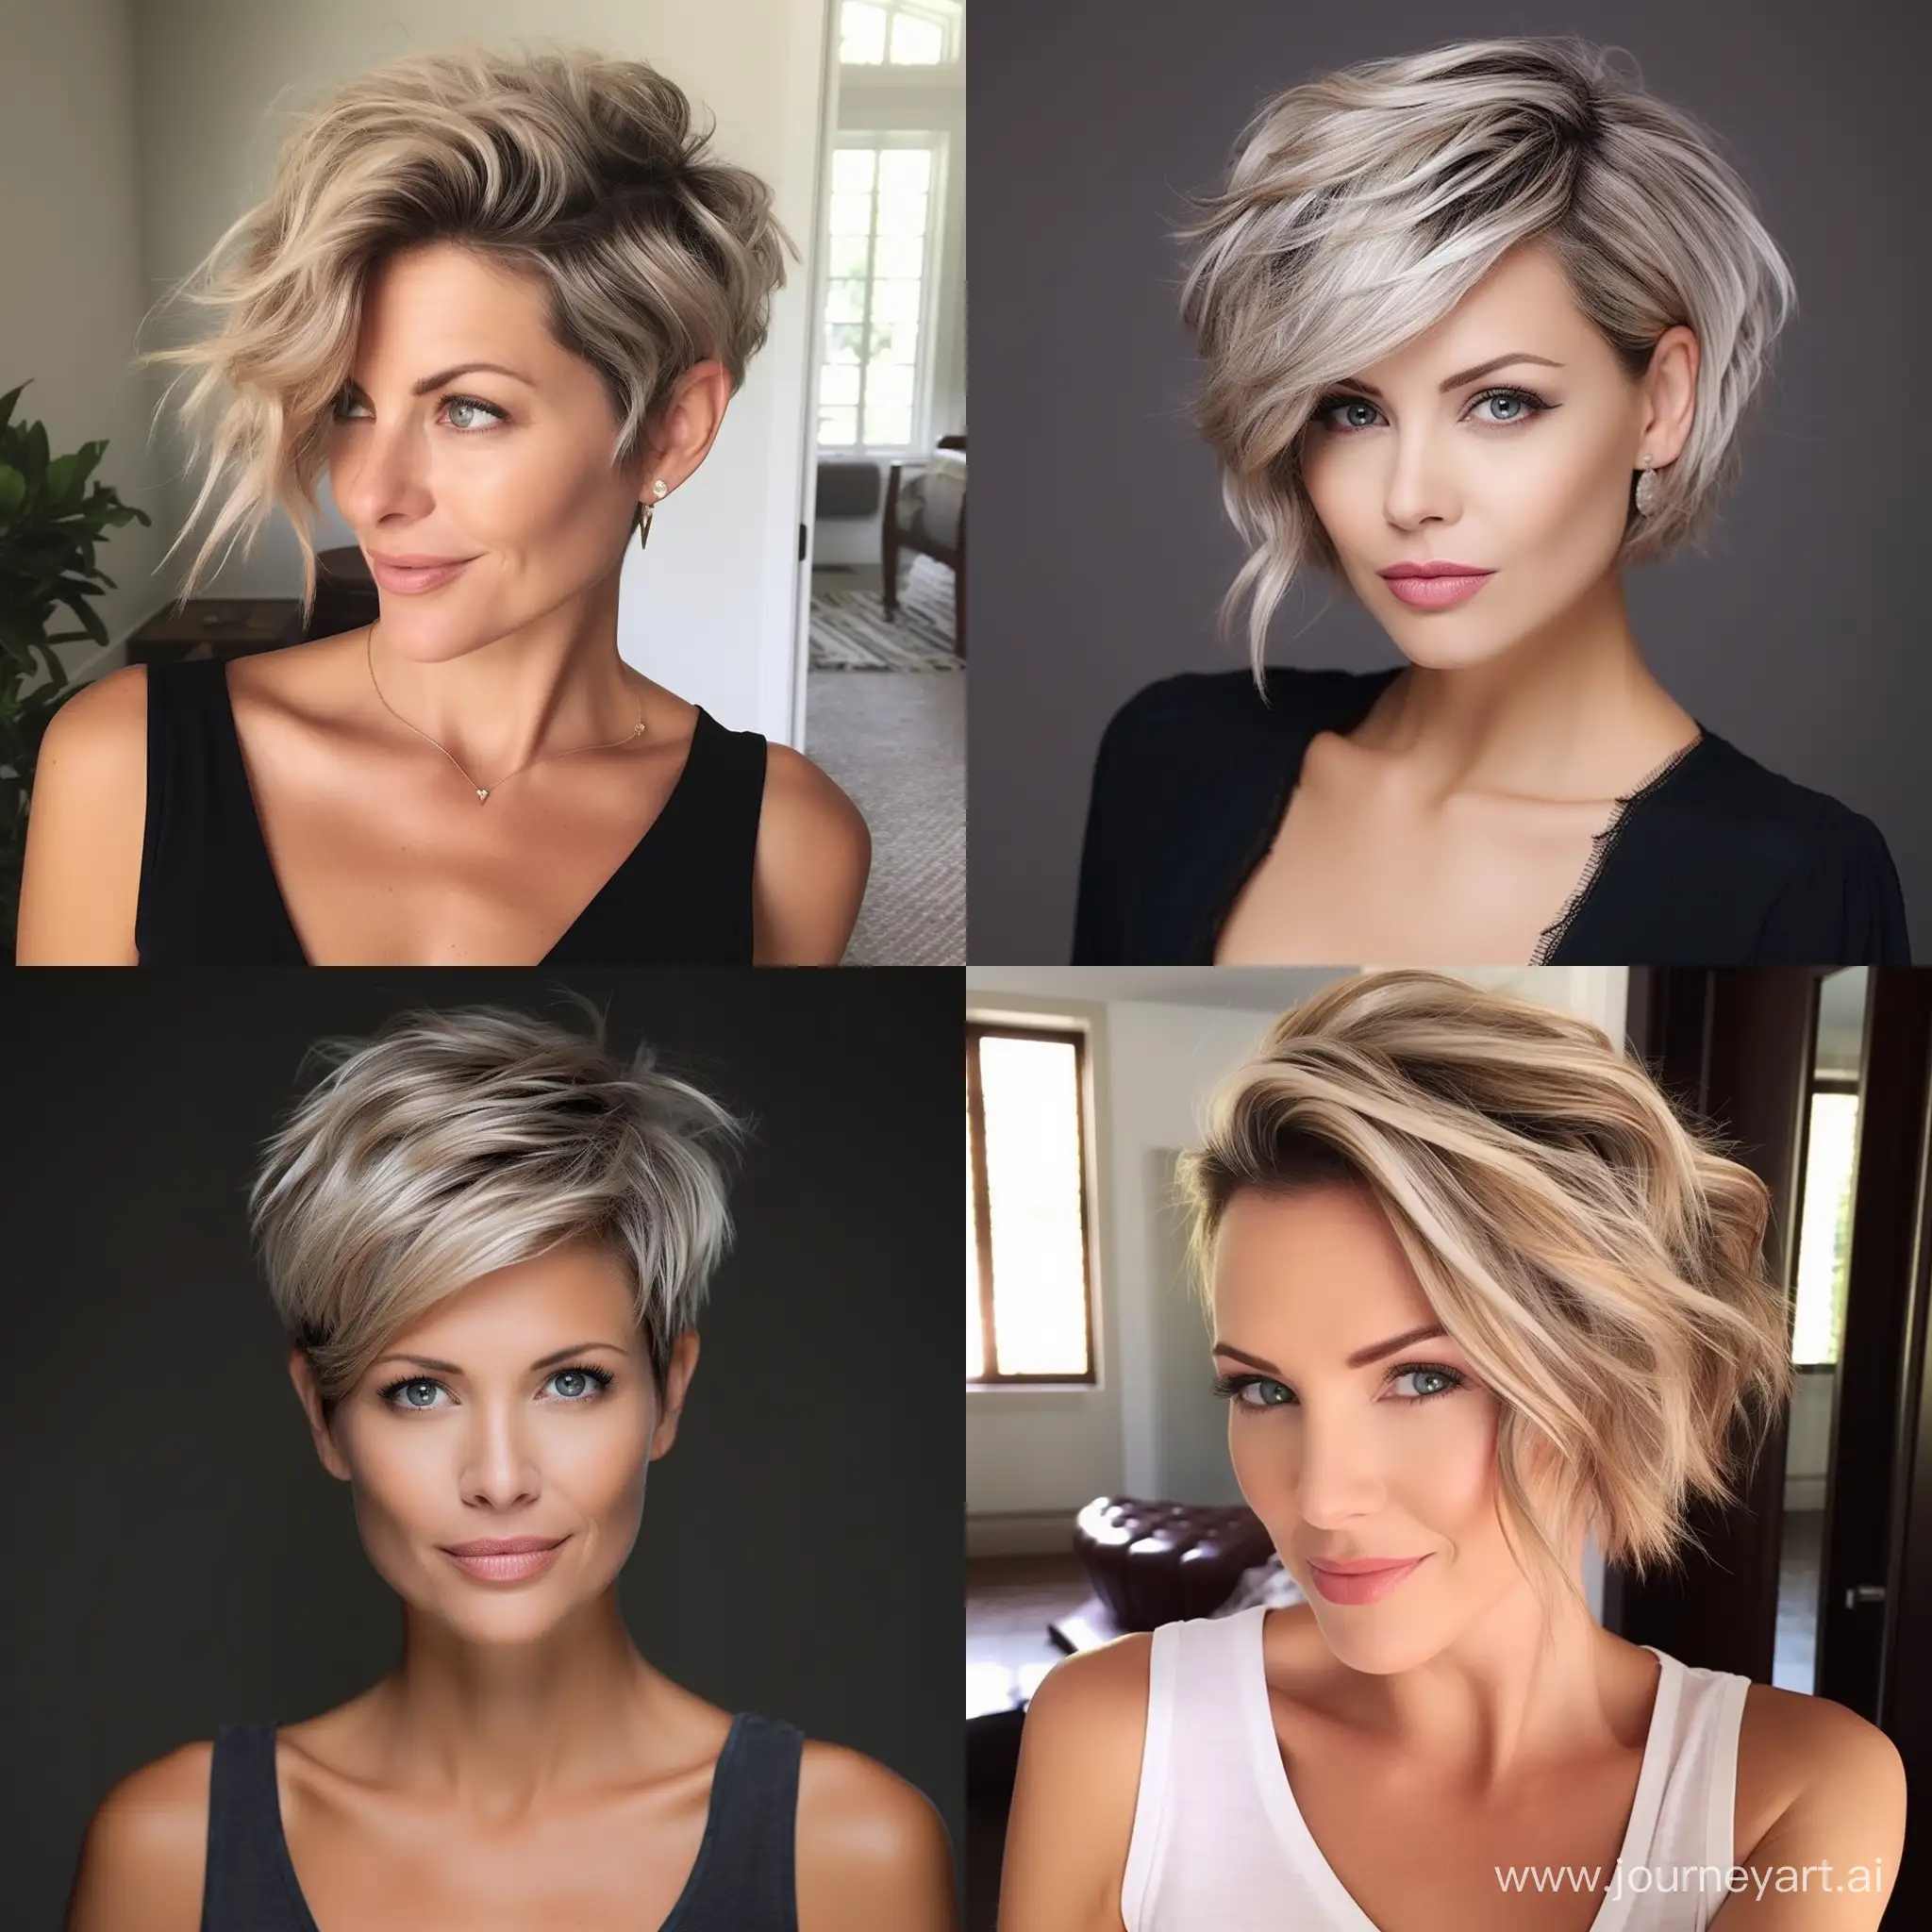 Trendy Short Hairstyles for Women Over 40